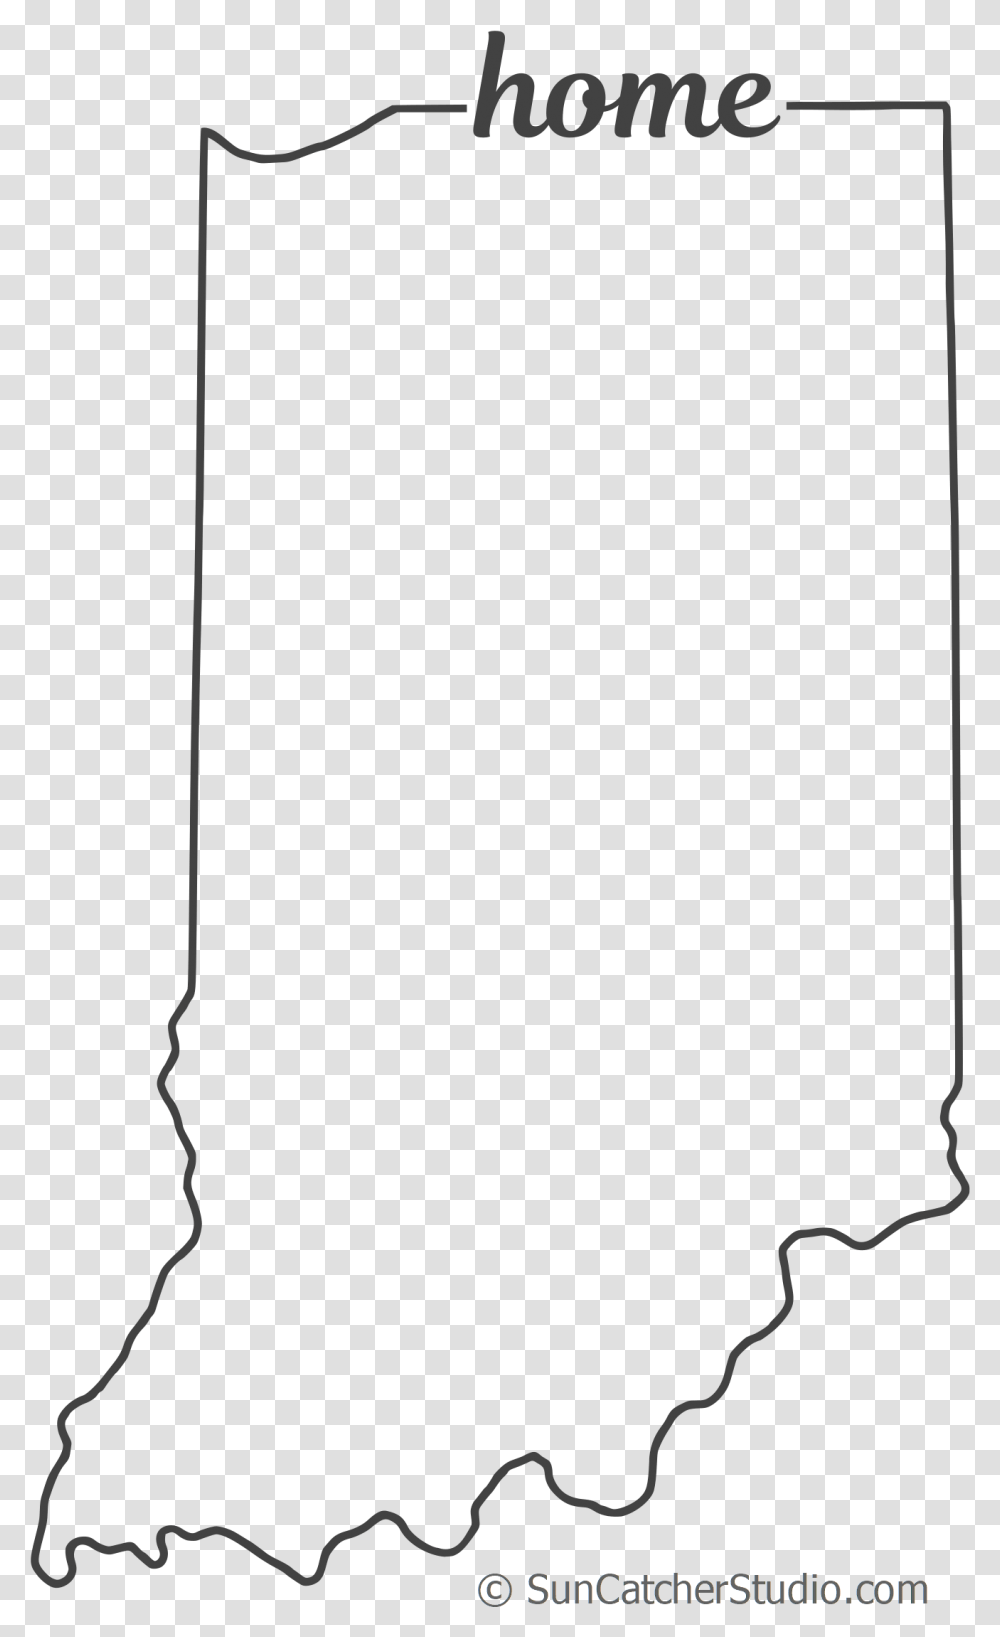 Free Indiana Outline With Home On Border Cricut Or Line Art, Electronics, Plot, Screen Transparent Png